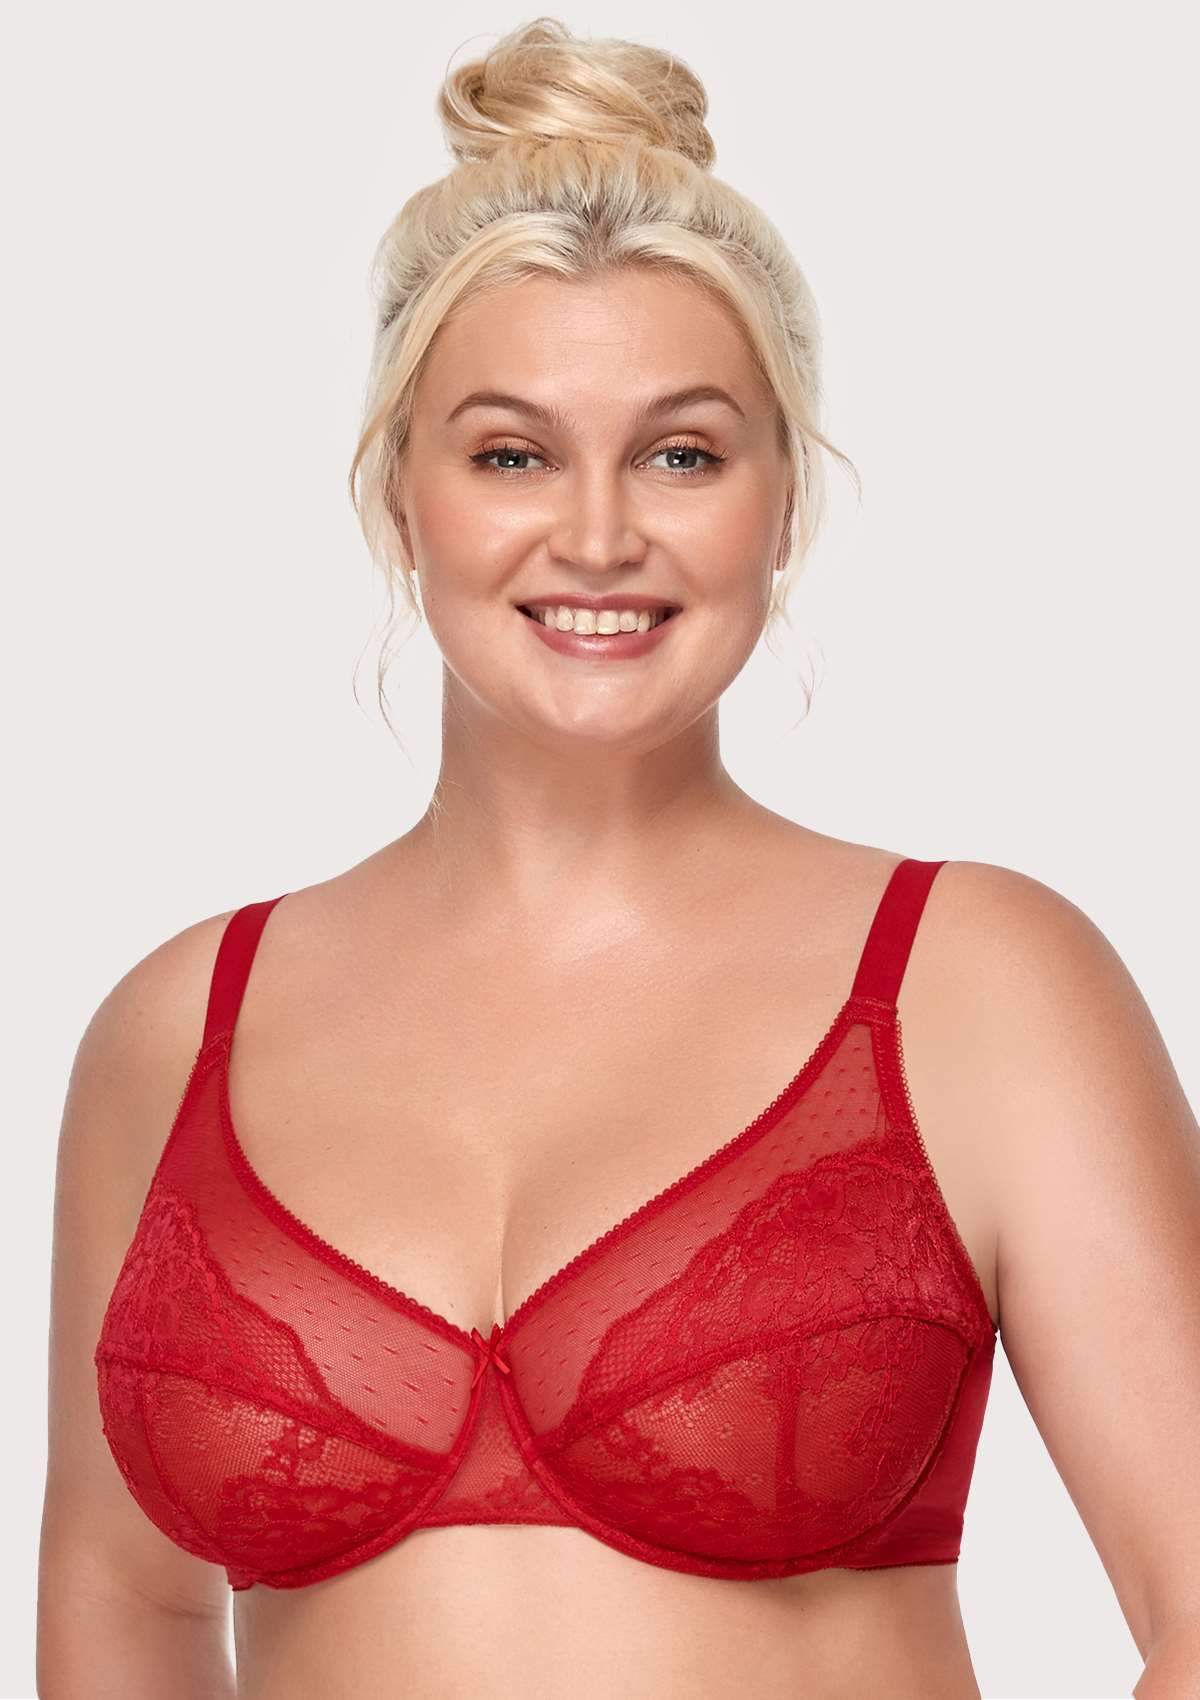 Wine Red Lace Bras For Women Sexy Embroidery Underwired Thin Bra Big Cup  Full Cup Bra Women Plus Size Bra C D E F G H I J